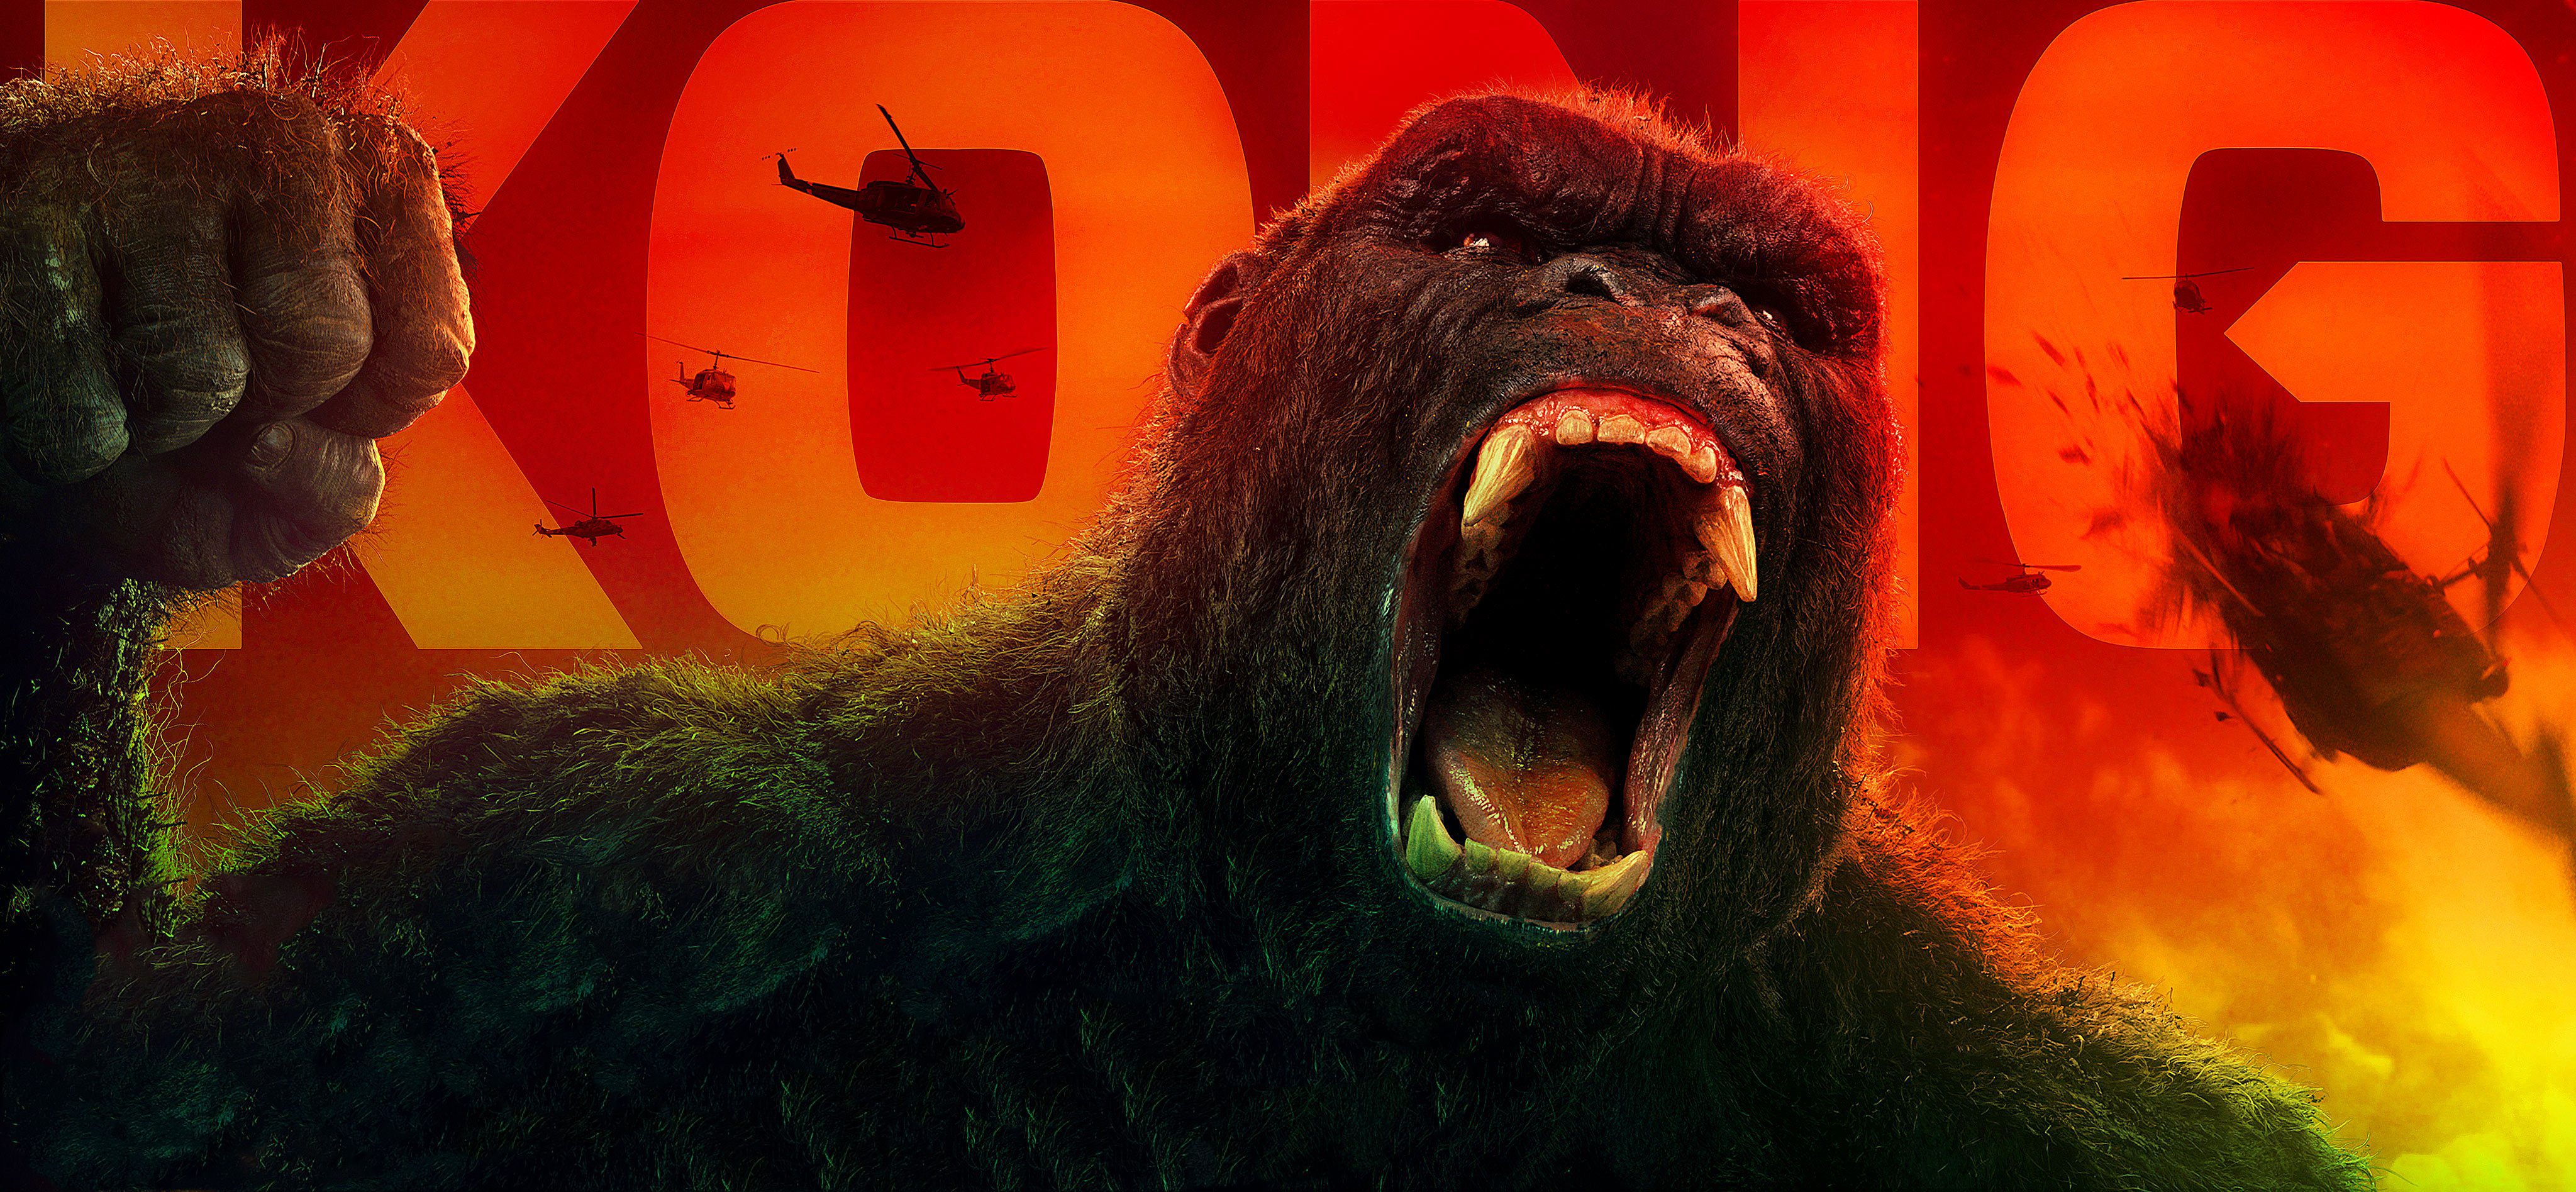 the king of kong full movie free